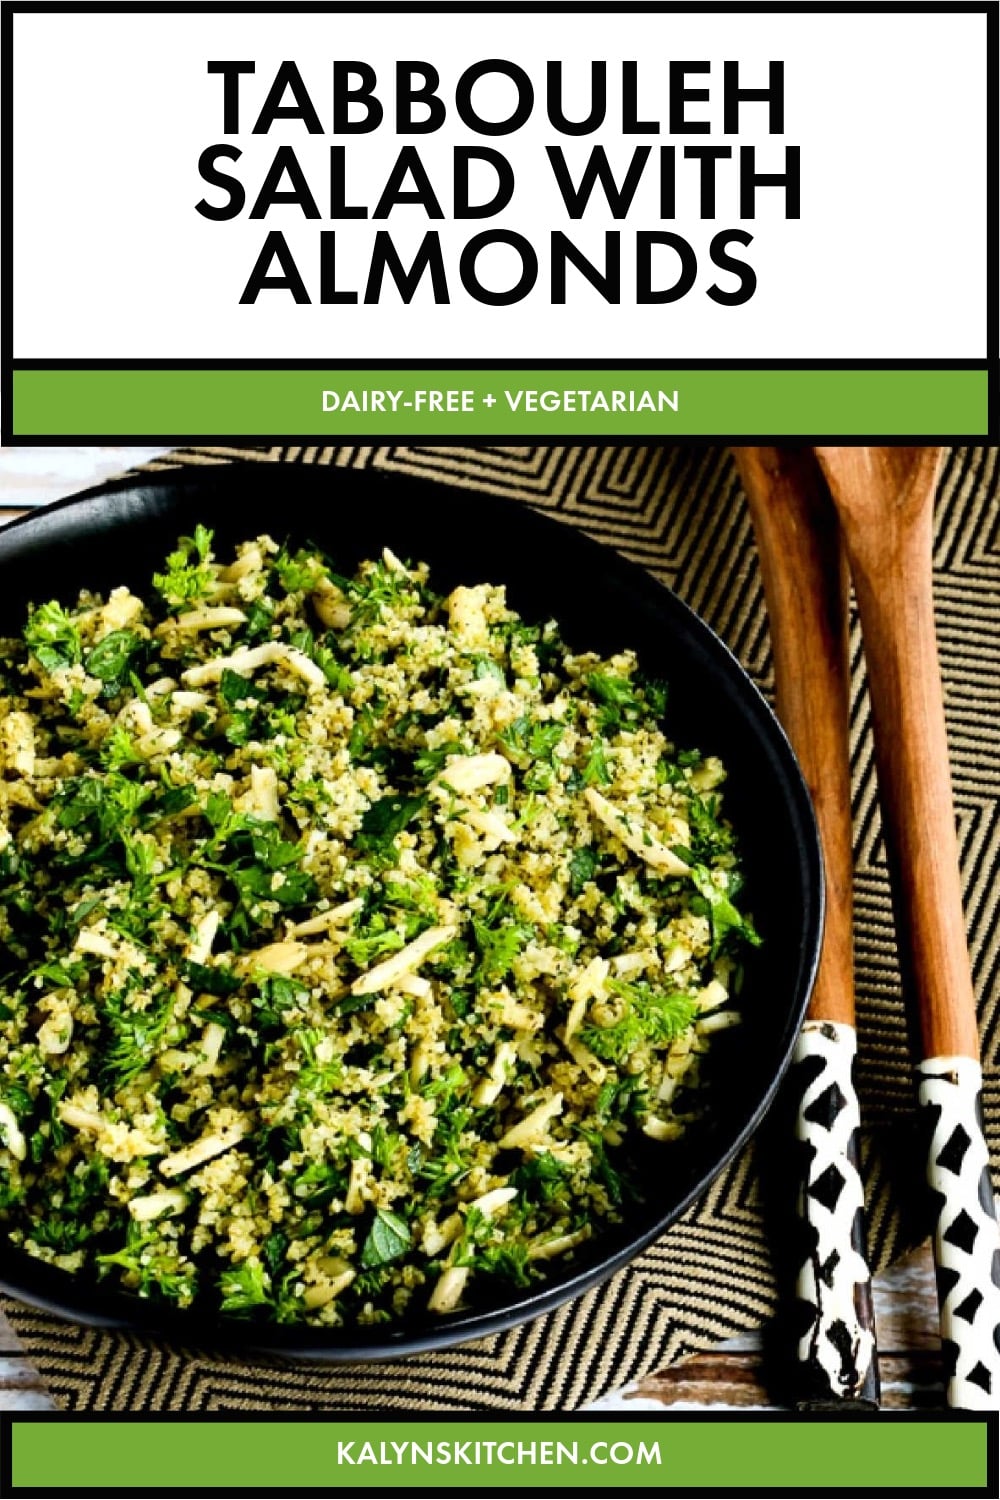 Pinterest image of Tabbouleh Salad with Almonds